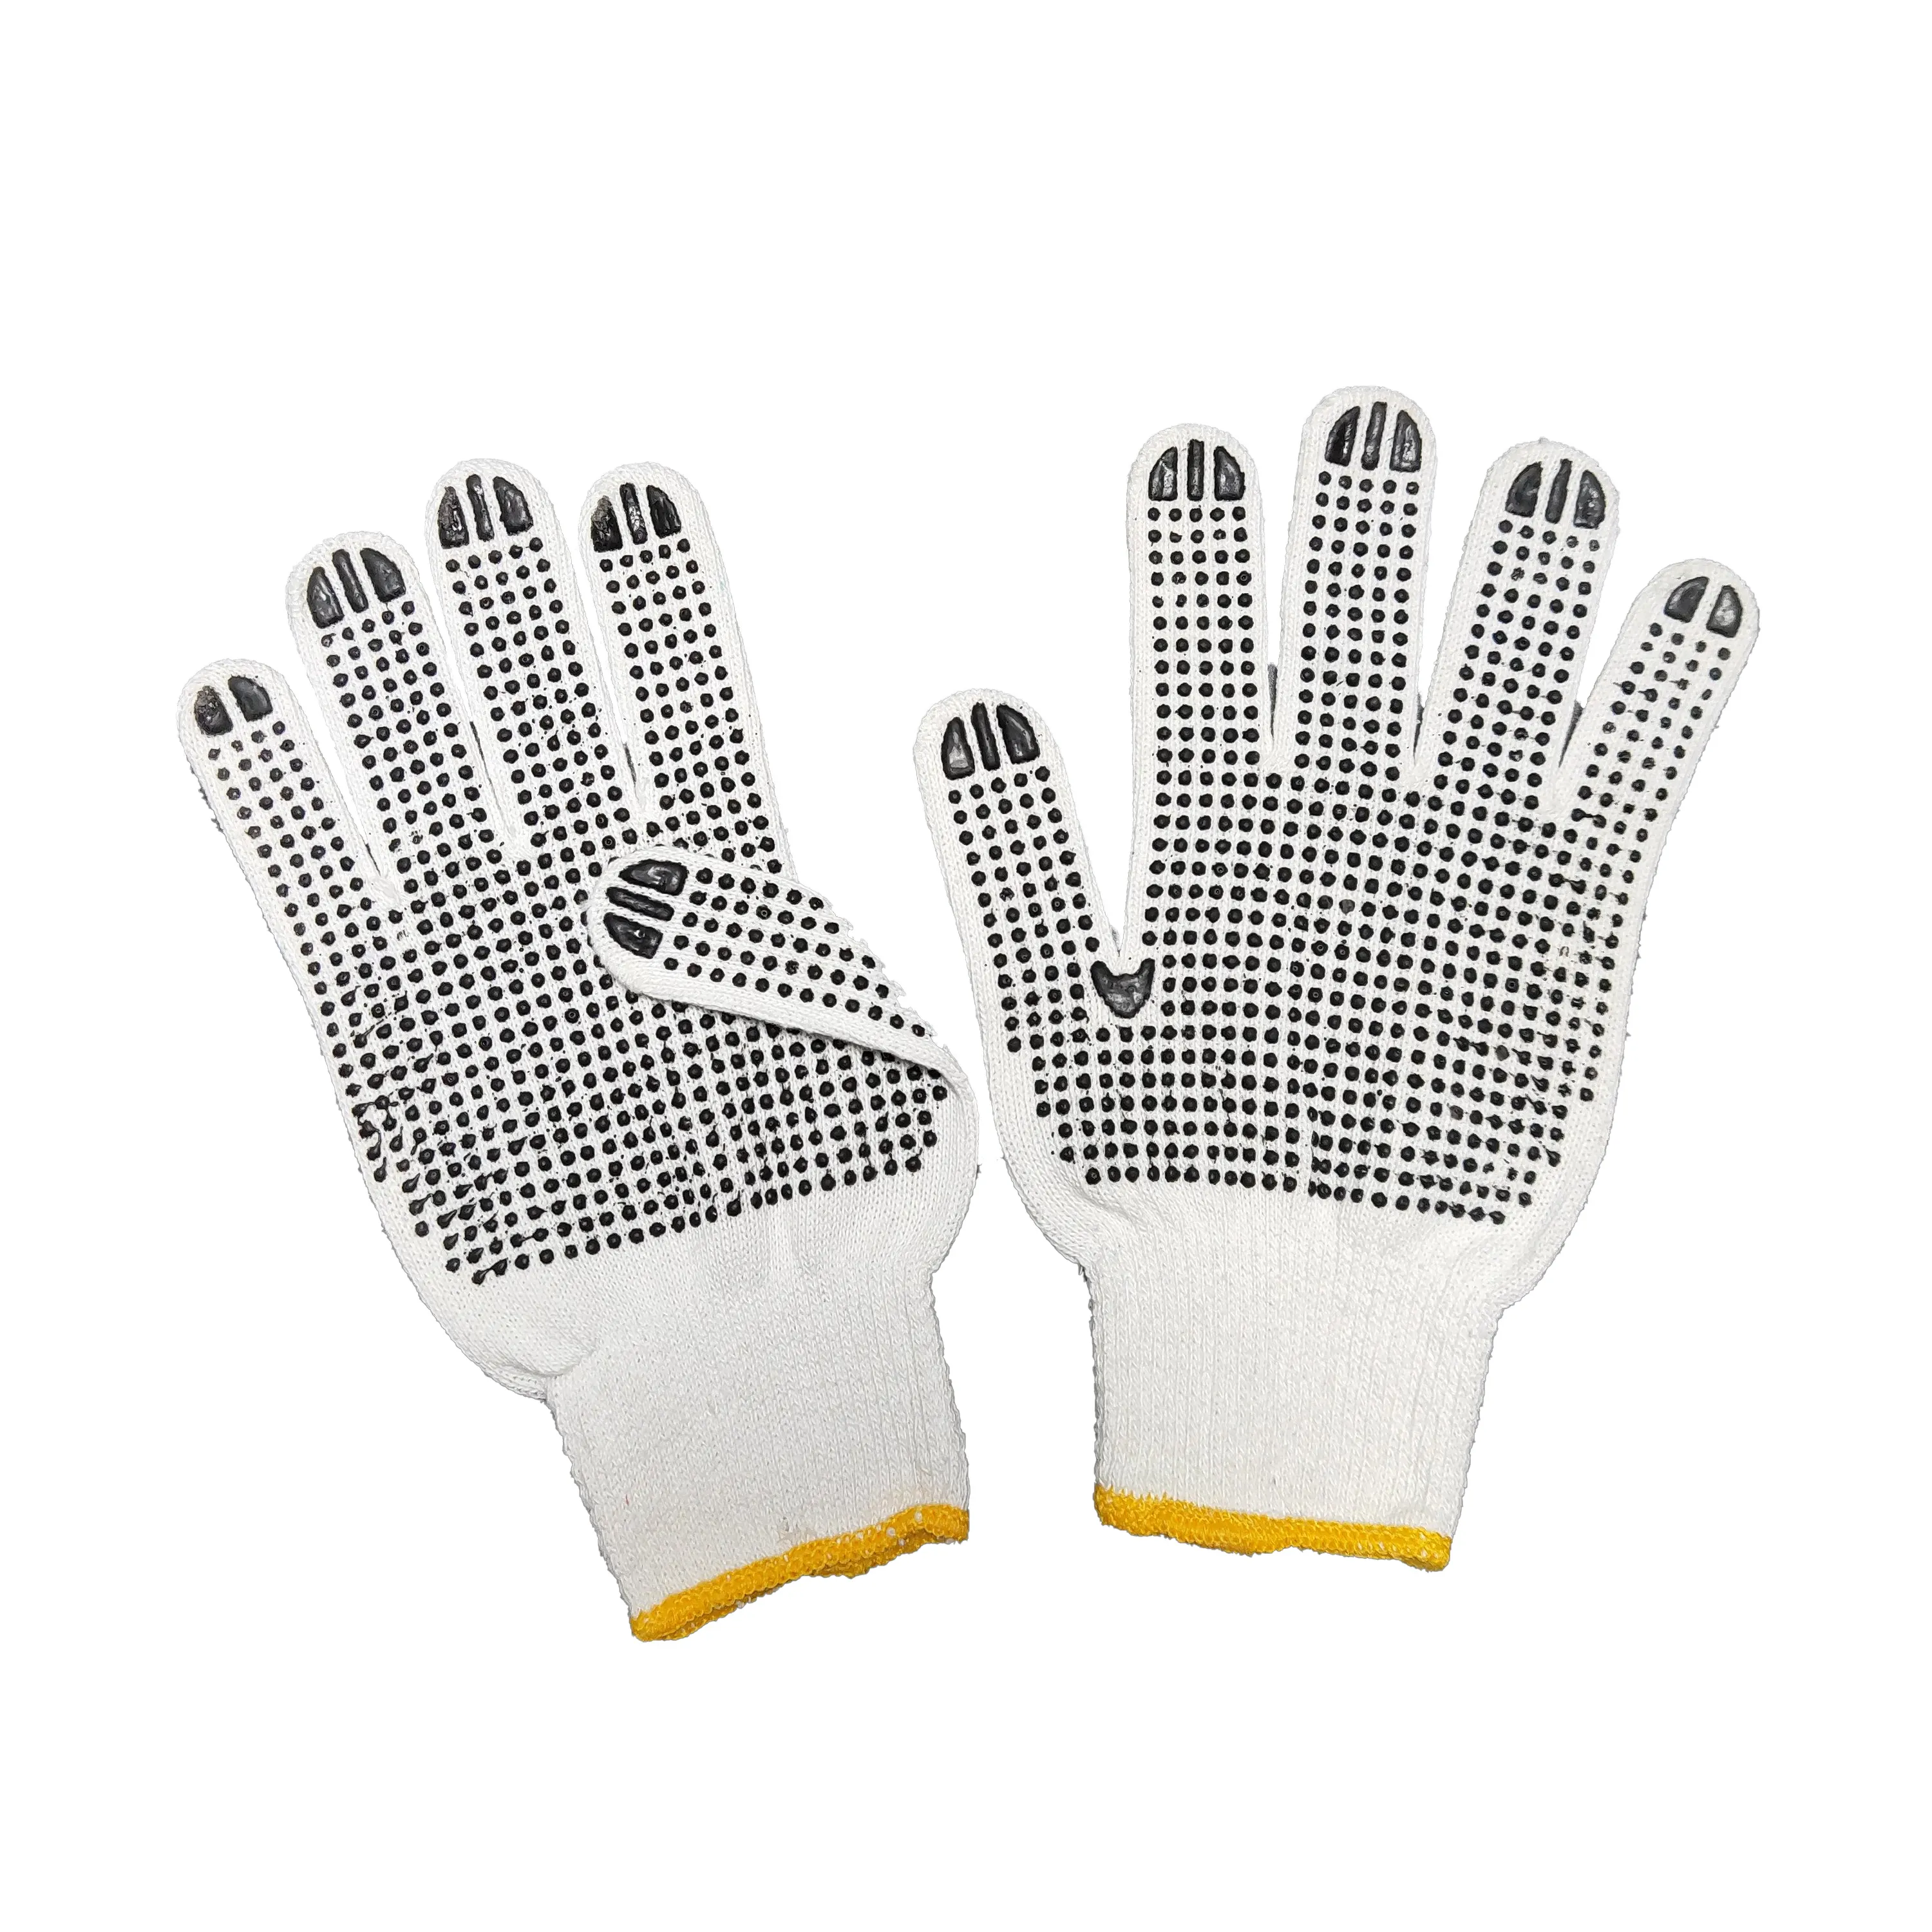 high quality white soft comfortable grip polycotton garden pvc gloves with dots on palm